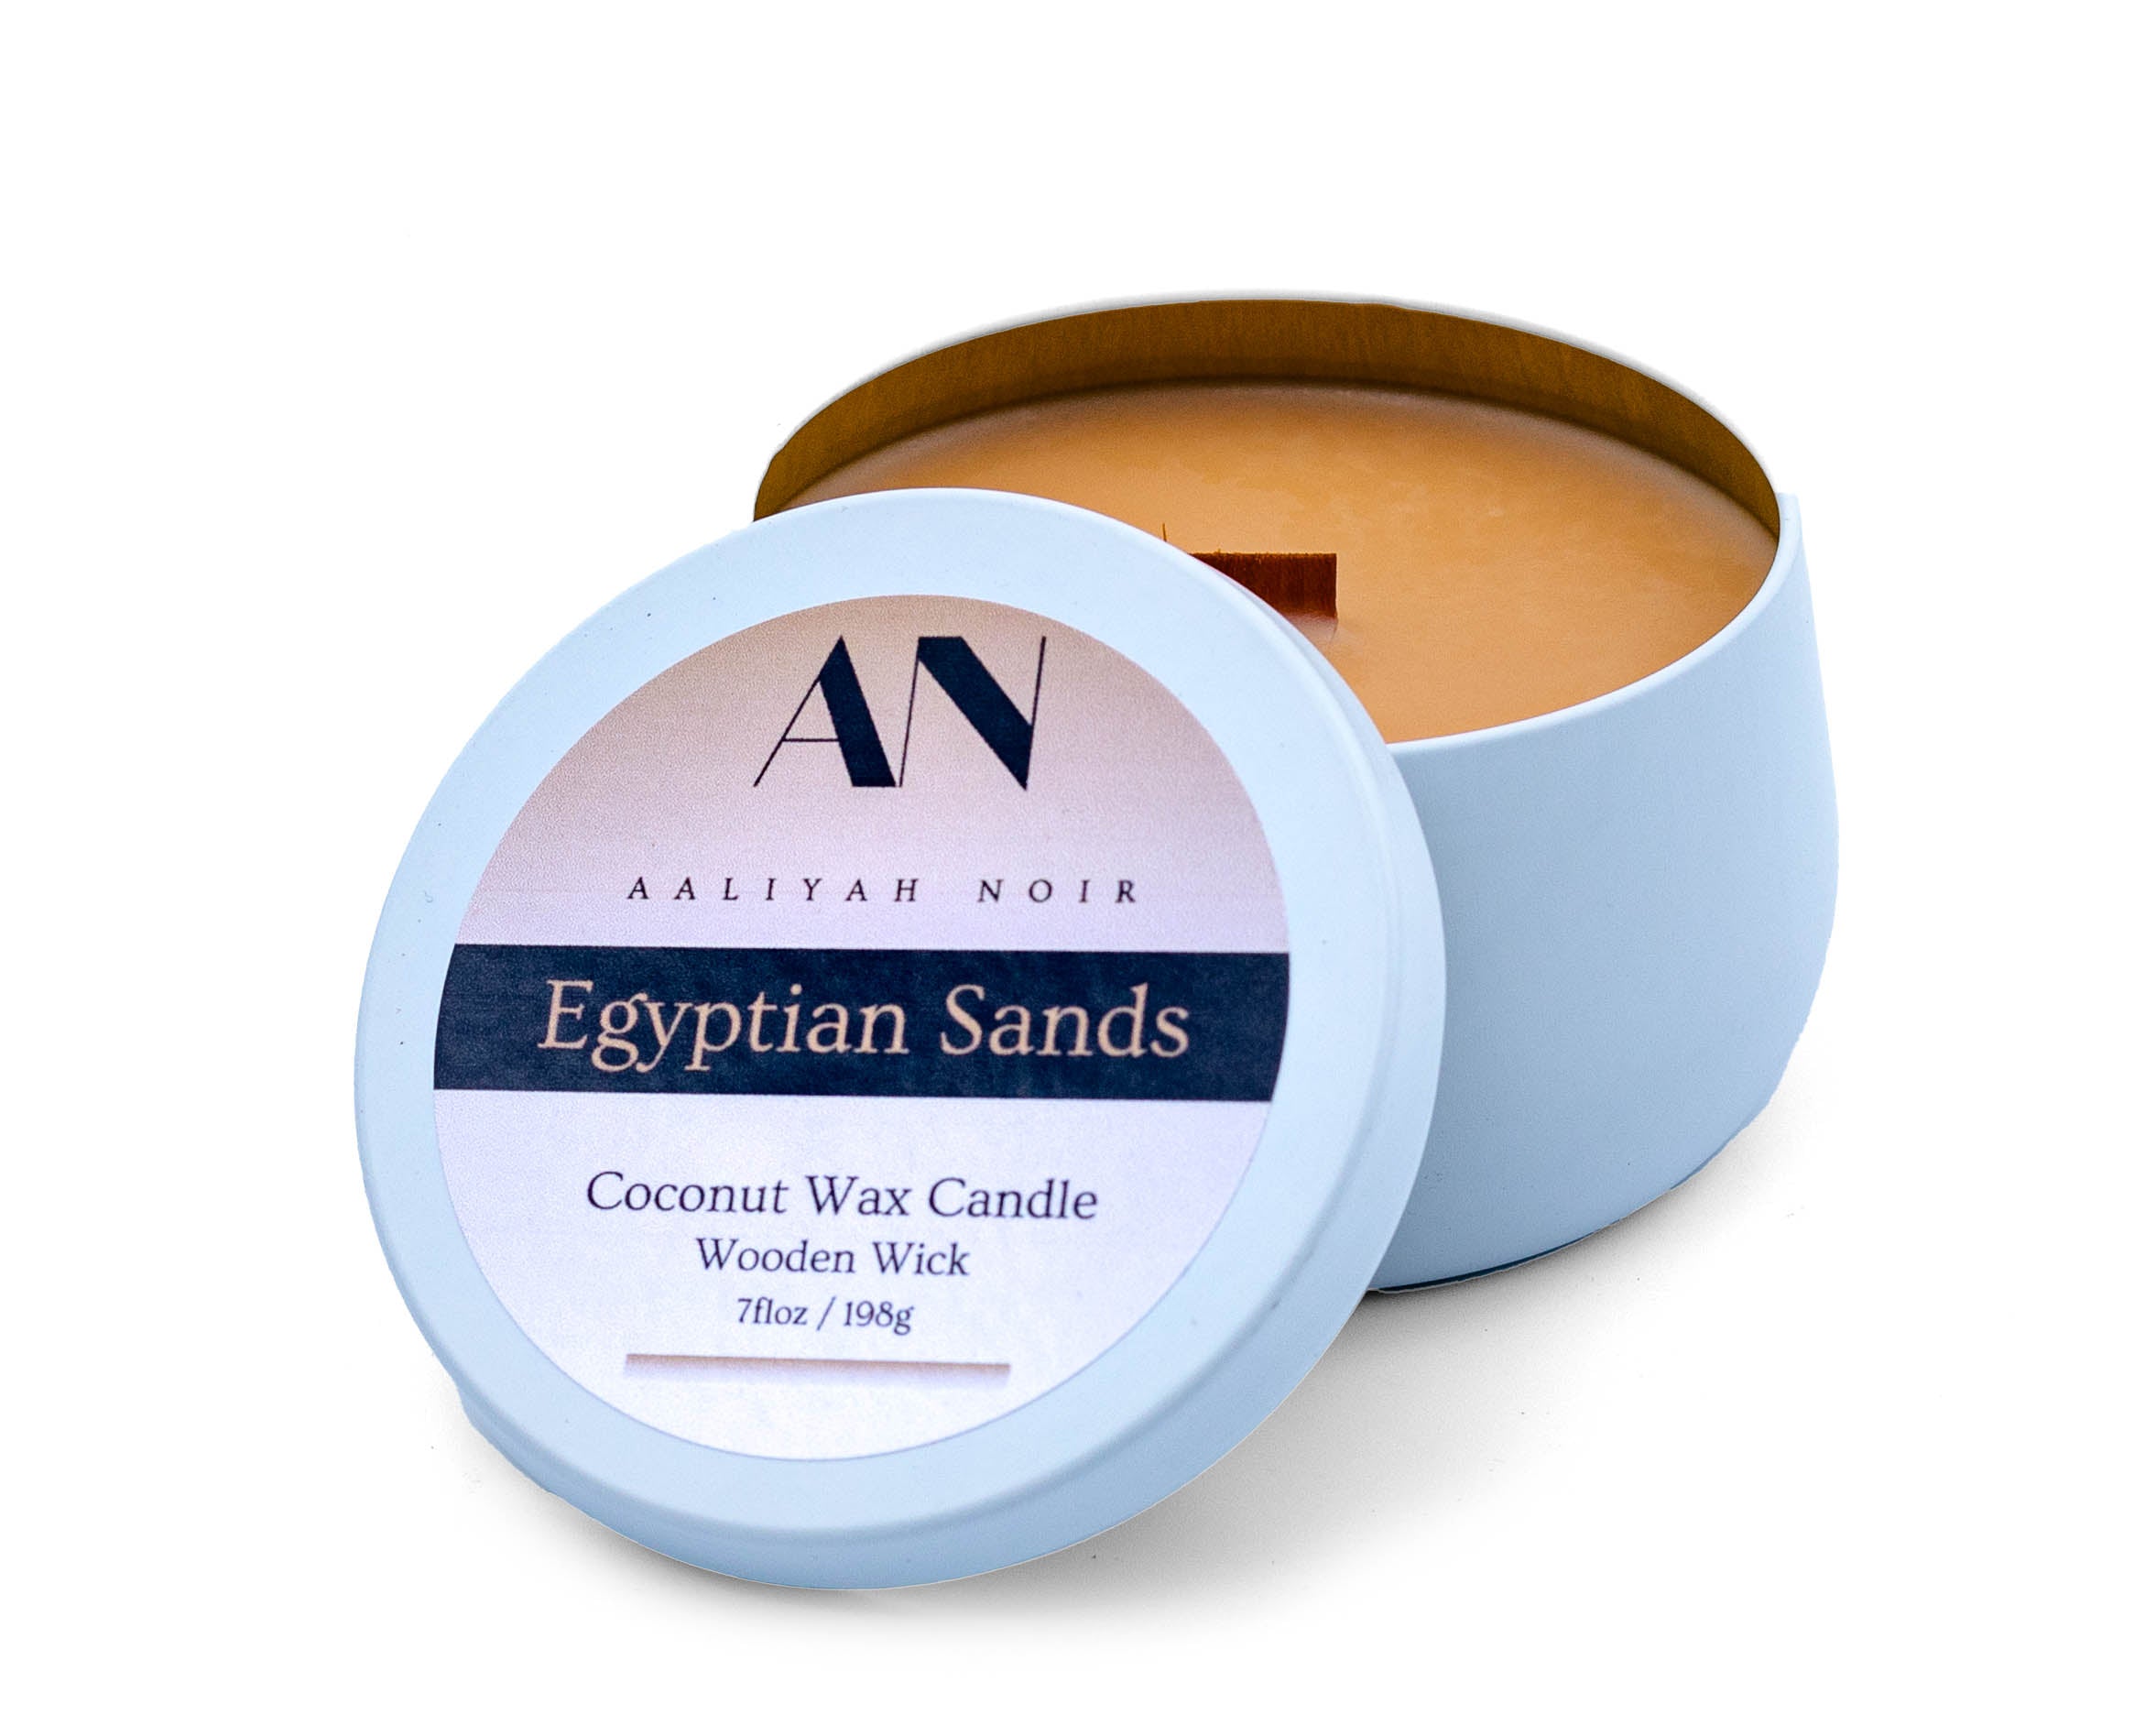 Egyptian Sands Coconut Wax Candle